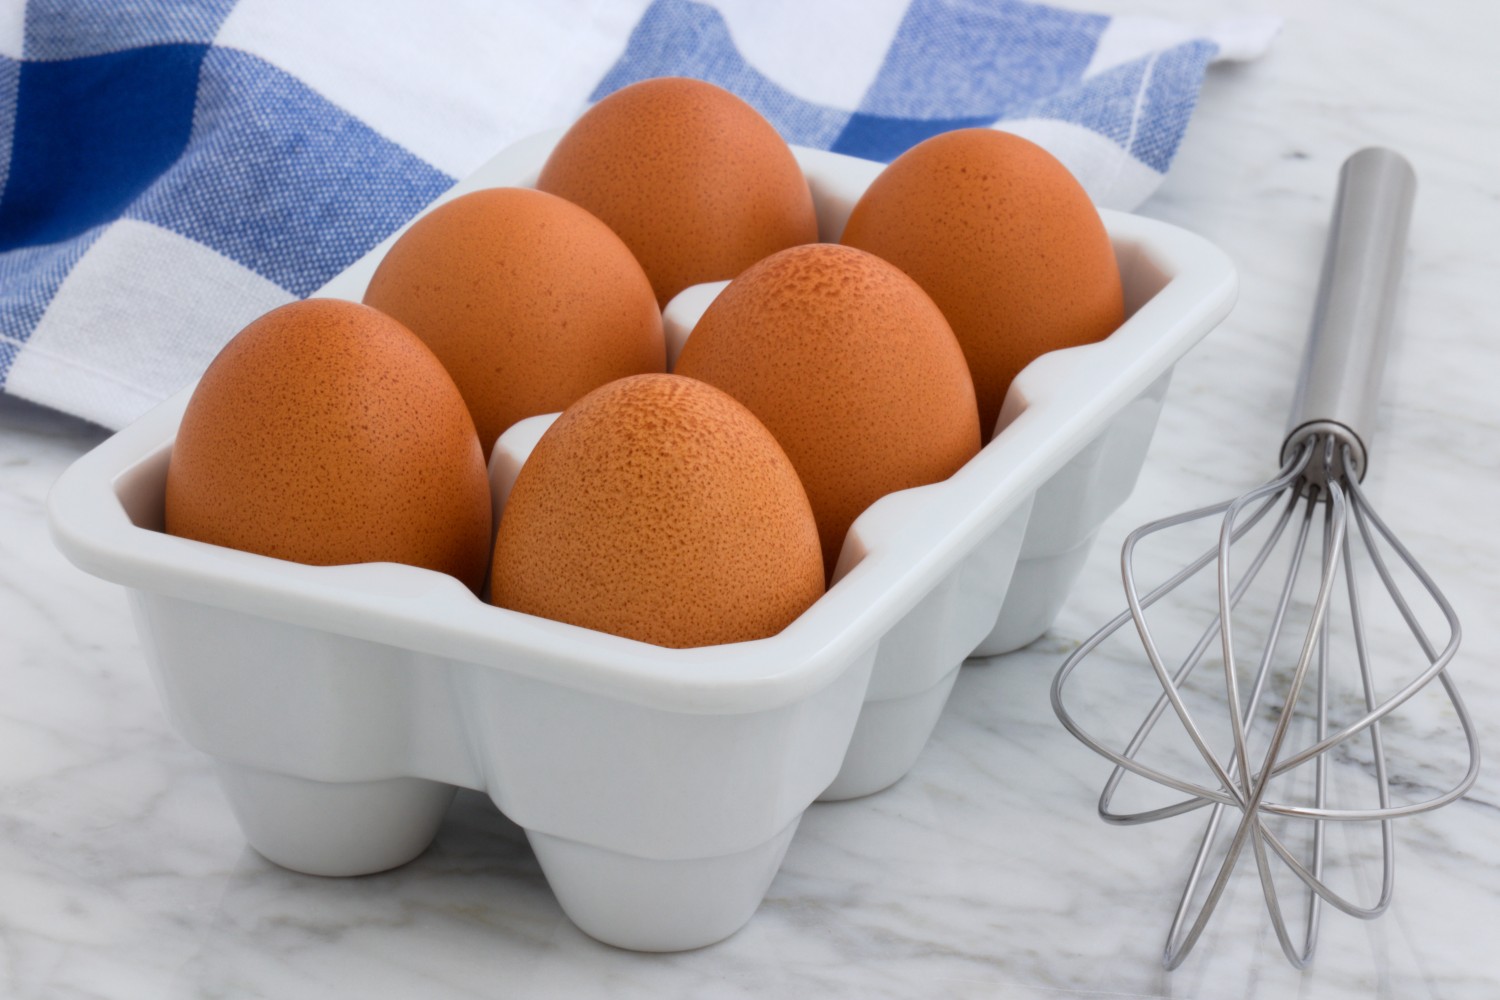 Russia's FAS Initiated Cases Against Producers of Chicken Eggs